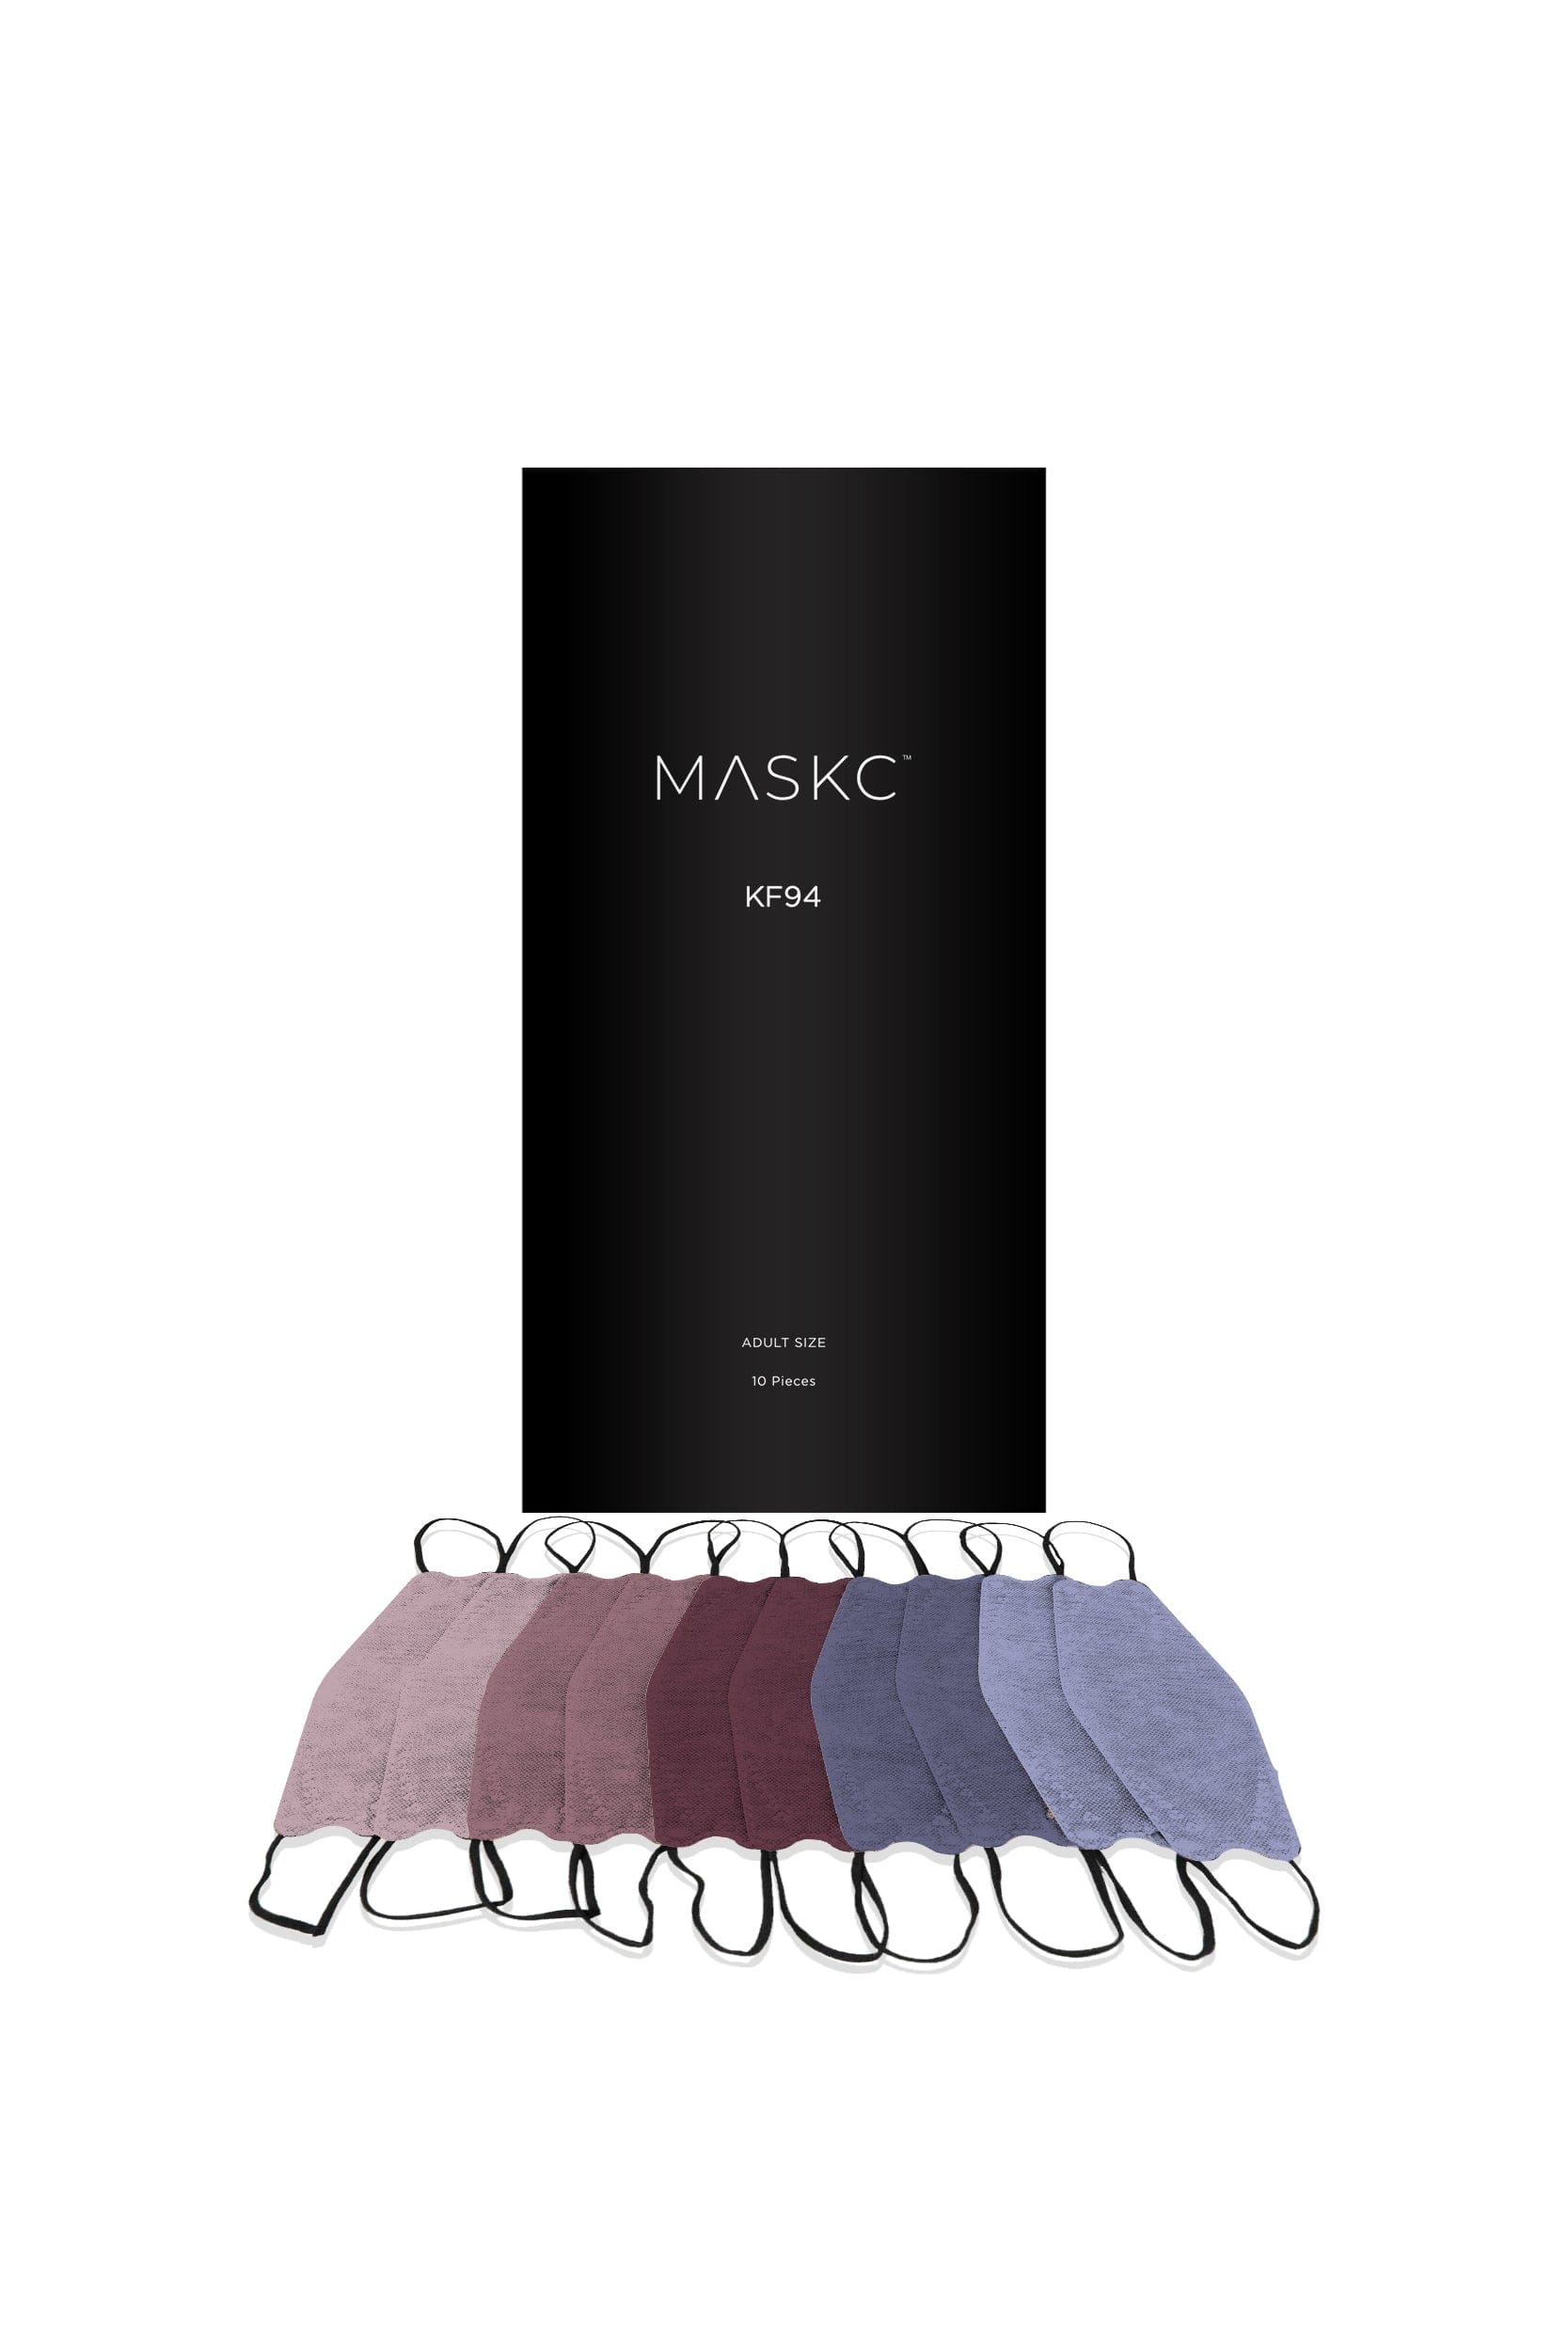 Pack of purple tone KF94 face masks. Each pack contains stylish high quality face masks. 